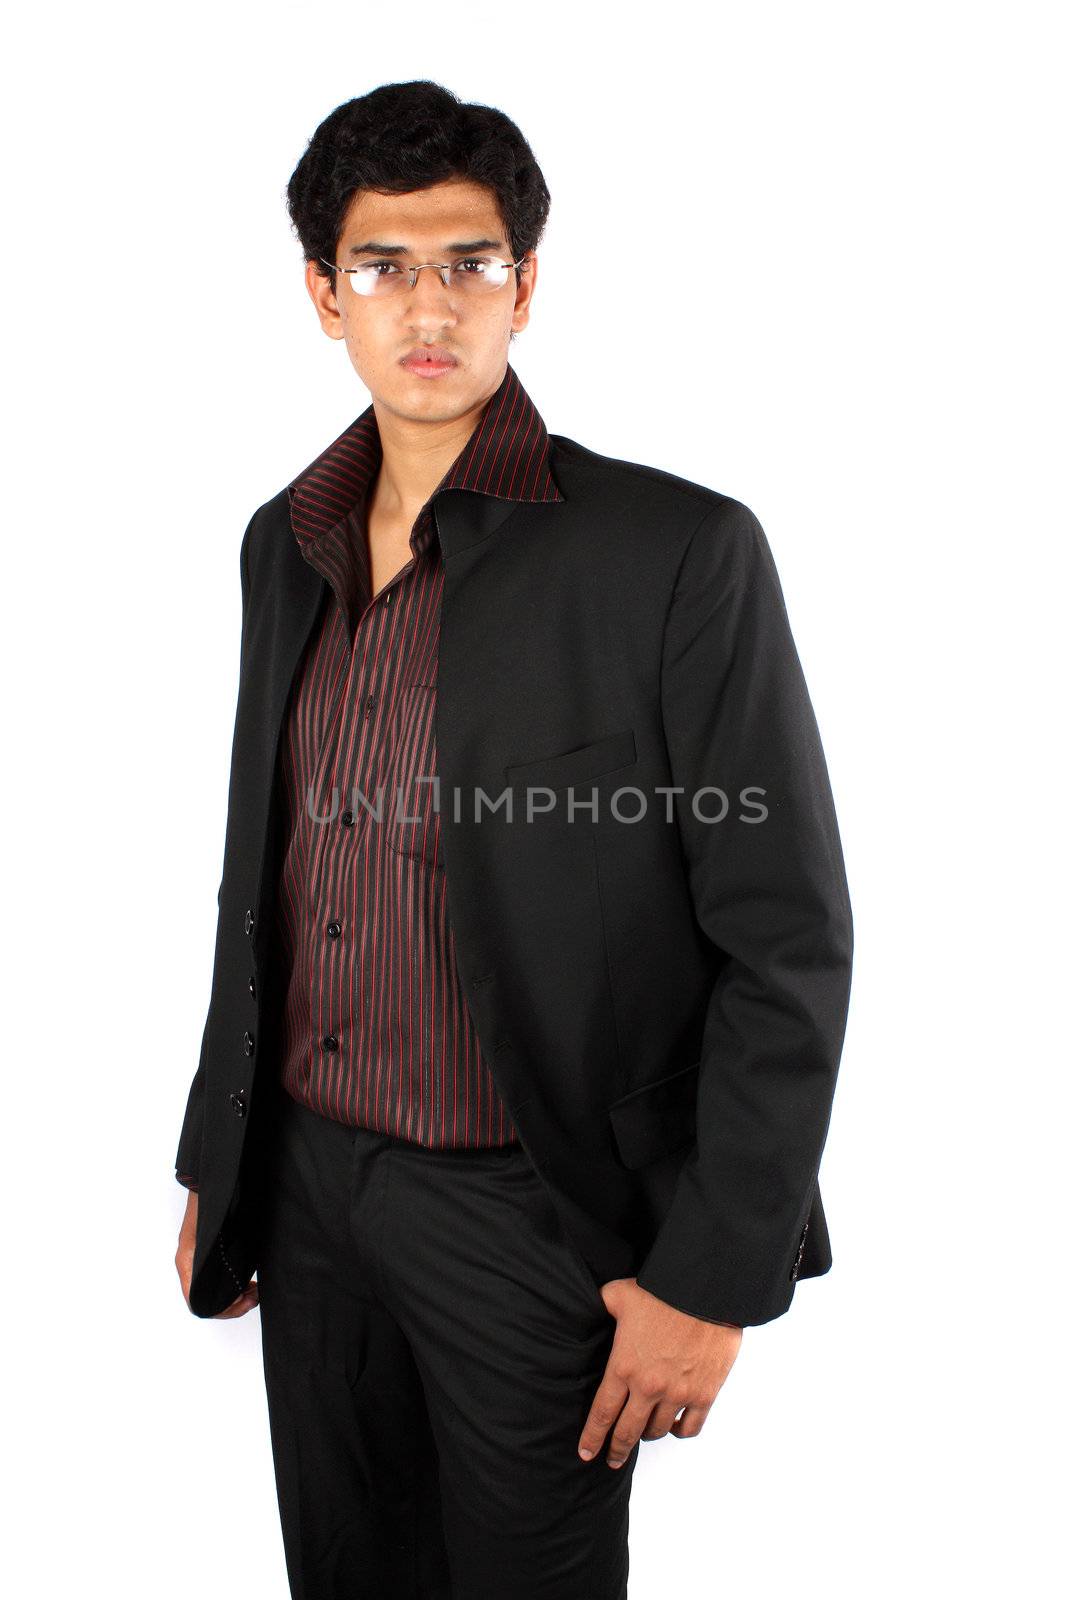 A portrait of a handsome young Indian business manager, on white studio background.